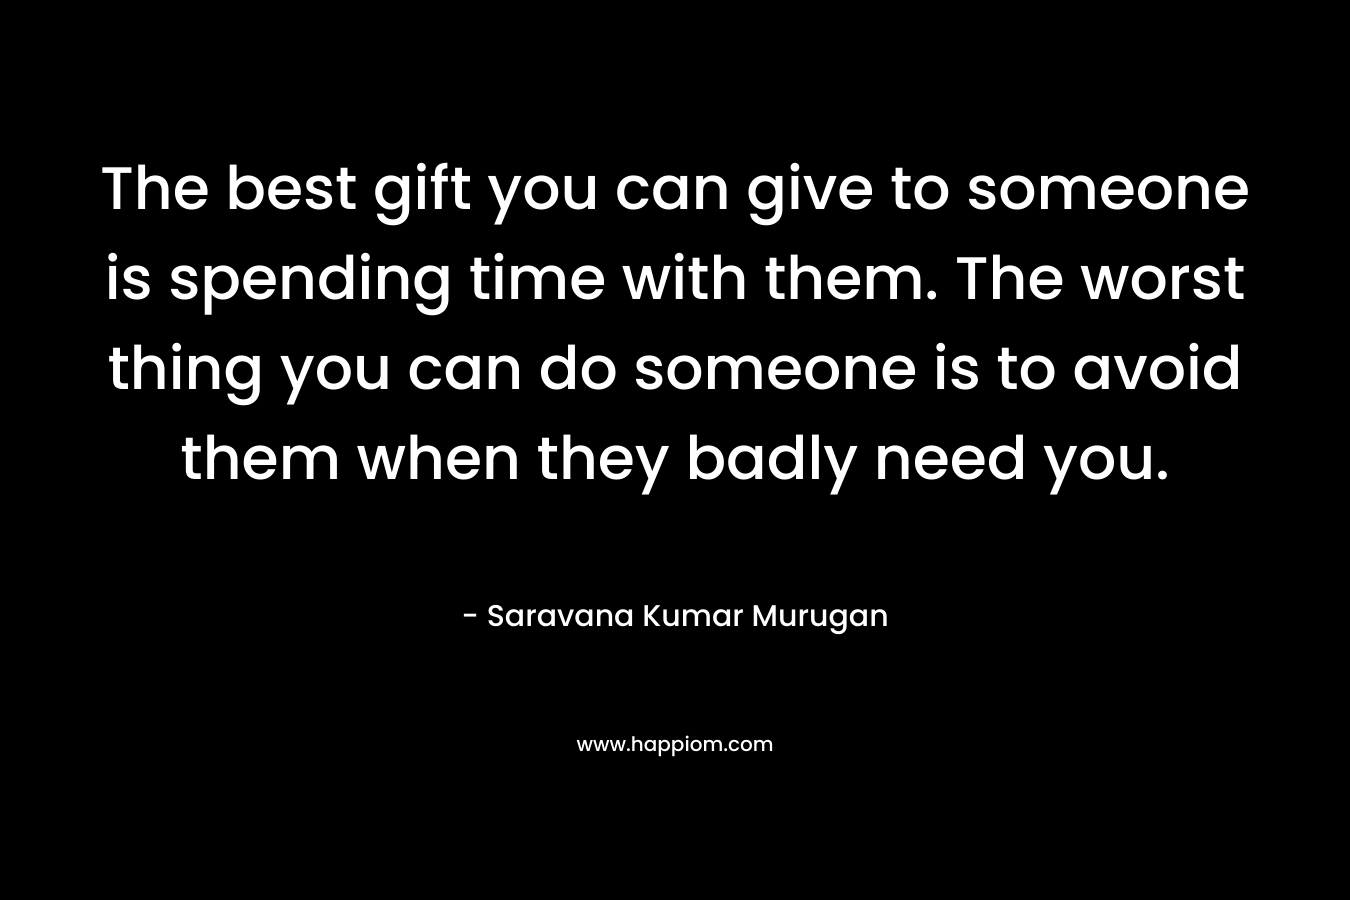 The best gift you can give to someone is spending time with them. The worst thing you can do someone is to avoid them when they badly need you.